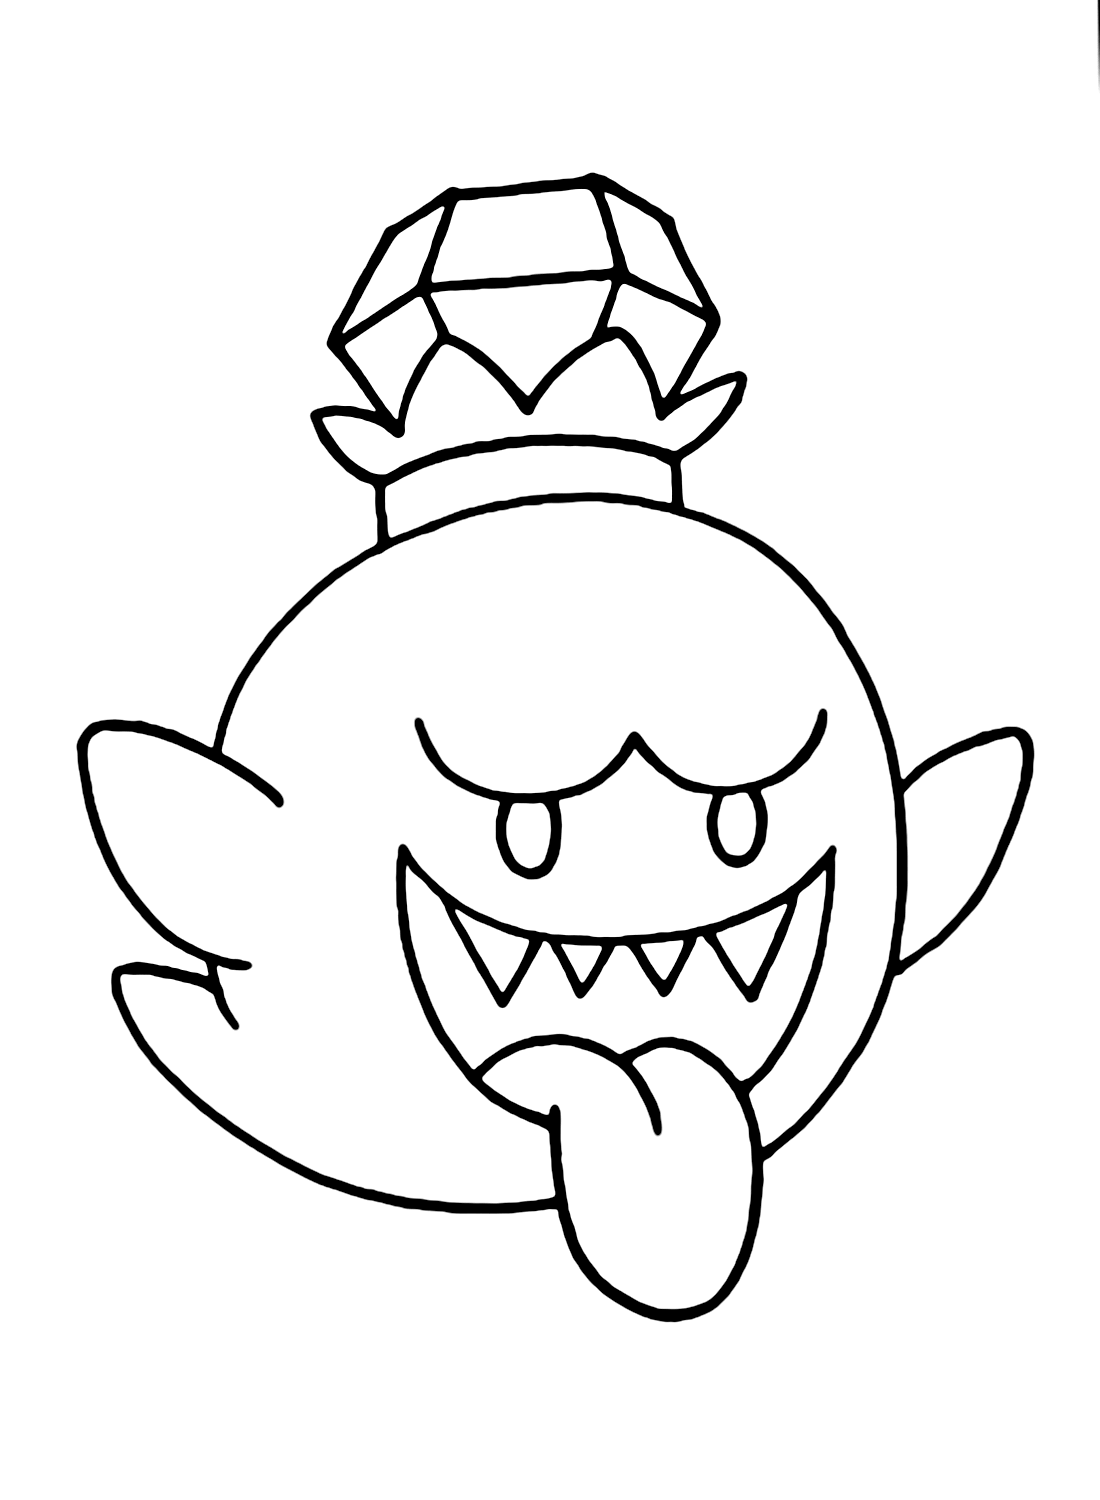 King Boo Images Coloring Page